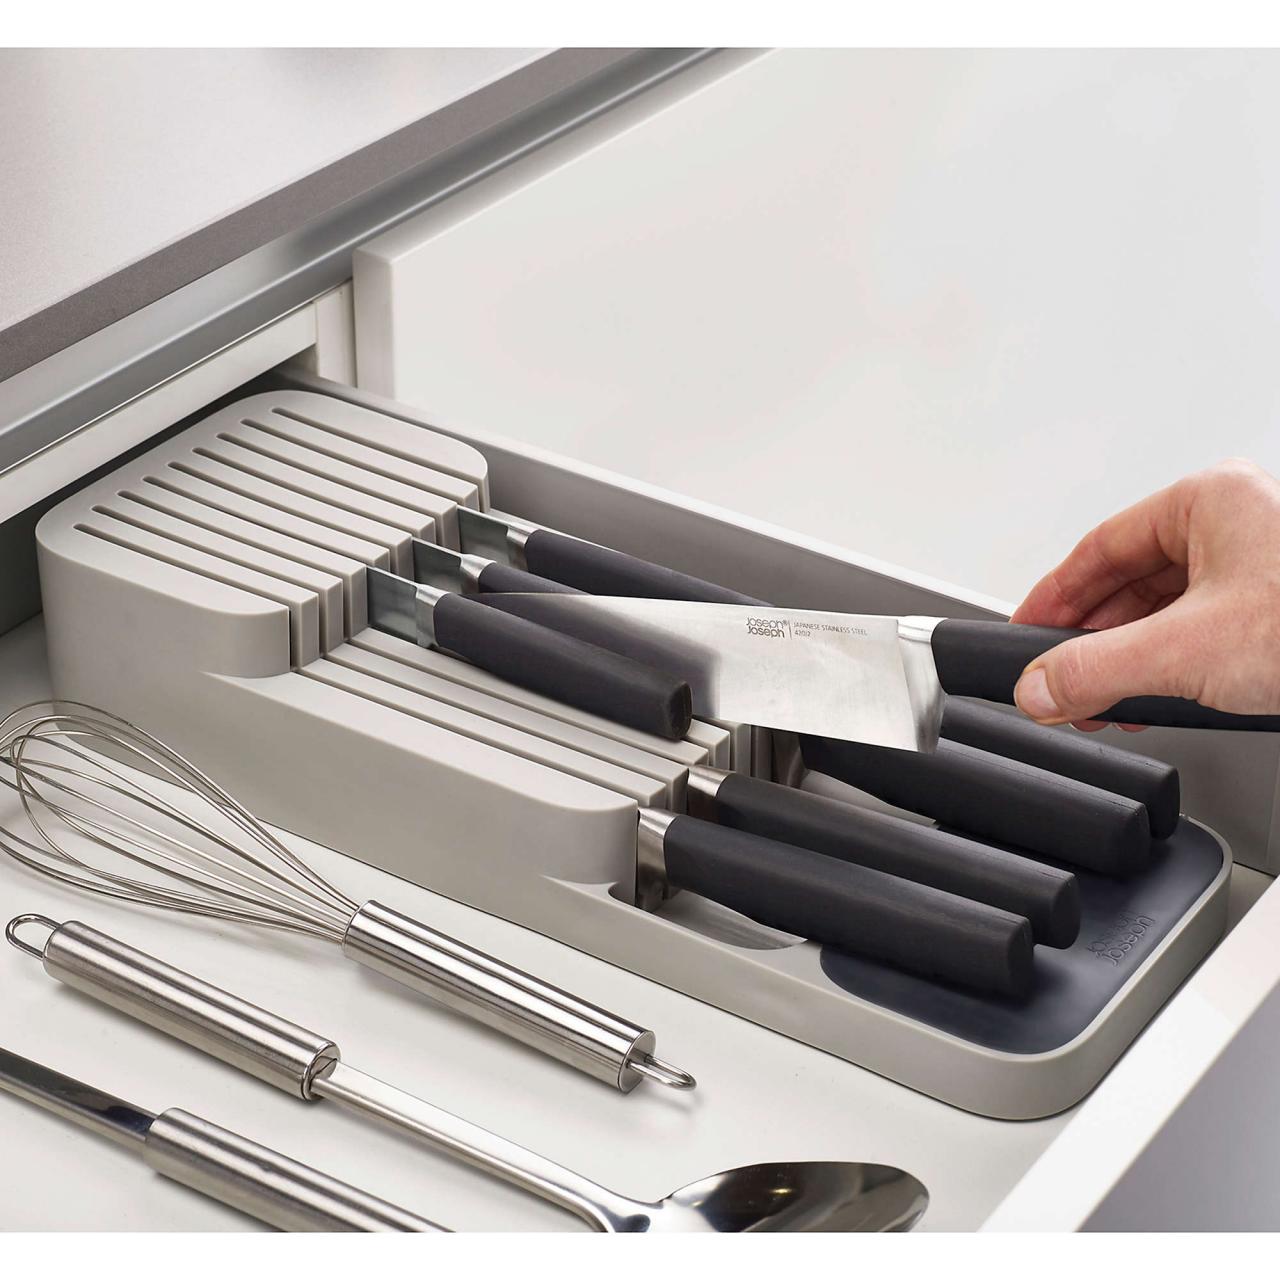 https://food.fnr.sndimg.com/content/dam/images/food/products/2021/1/5/rx_joseph-joseph-drawerstore-2-tier-compact-knife-organizer-in-grey.jpeg.rend.hgtvcom.1280.1280.suffix/1609867011775.jpeg